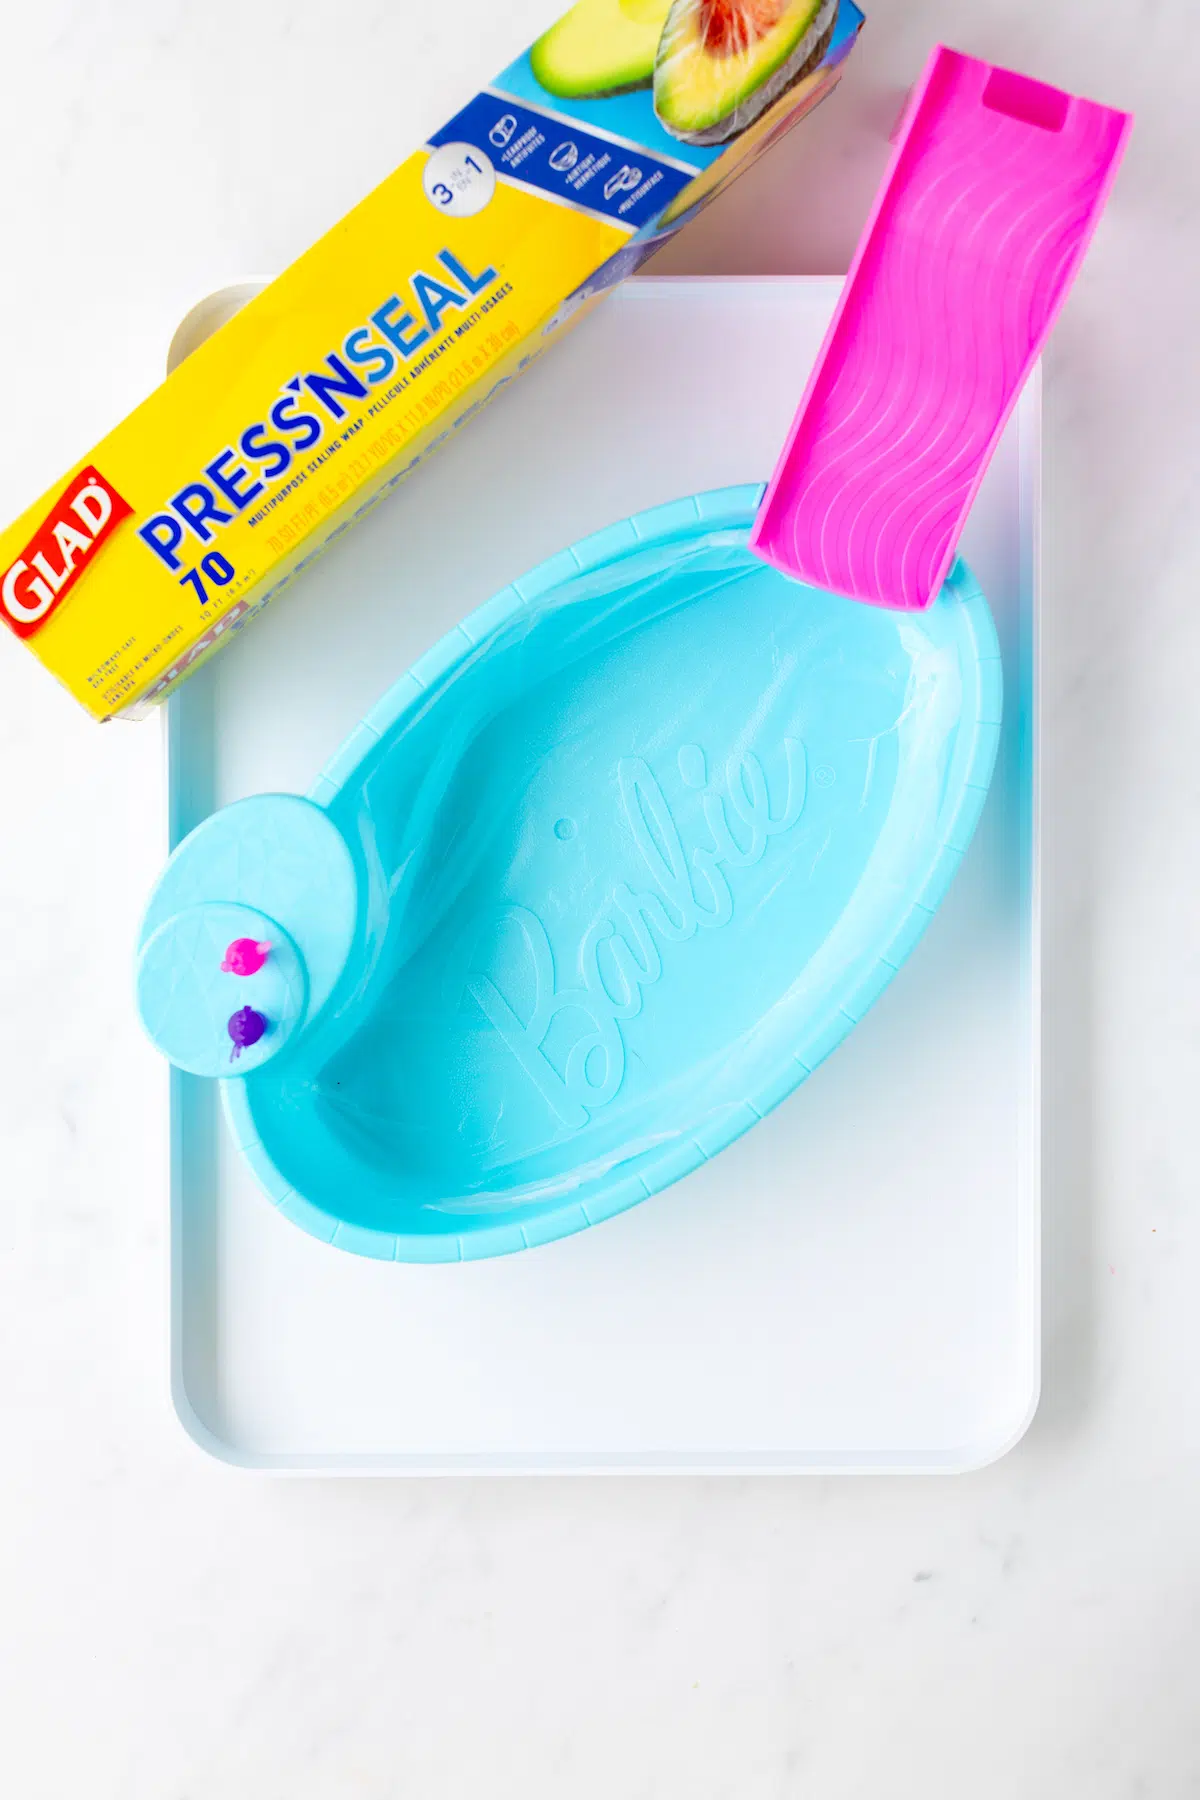 using press'n seal to coat barbie toy to use on food tray